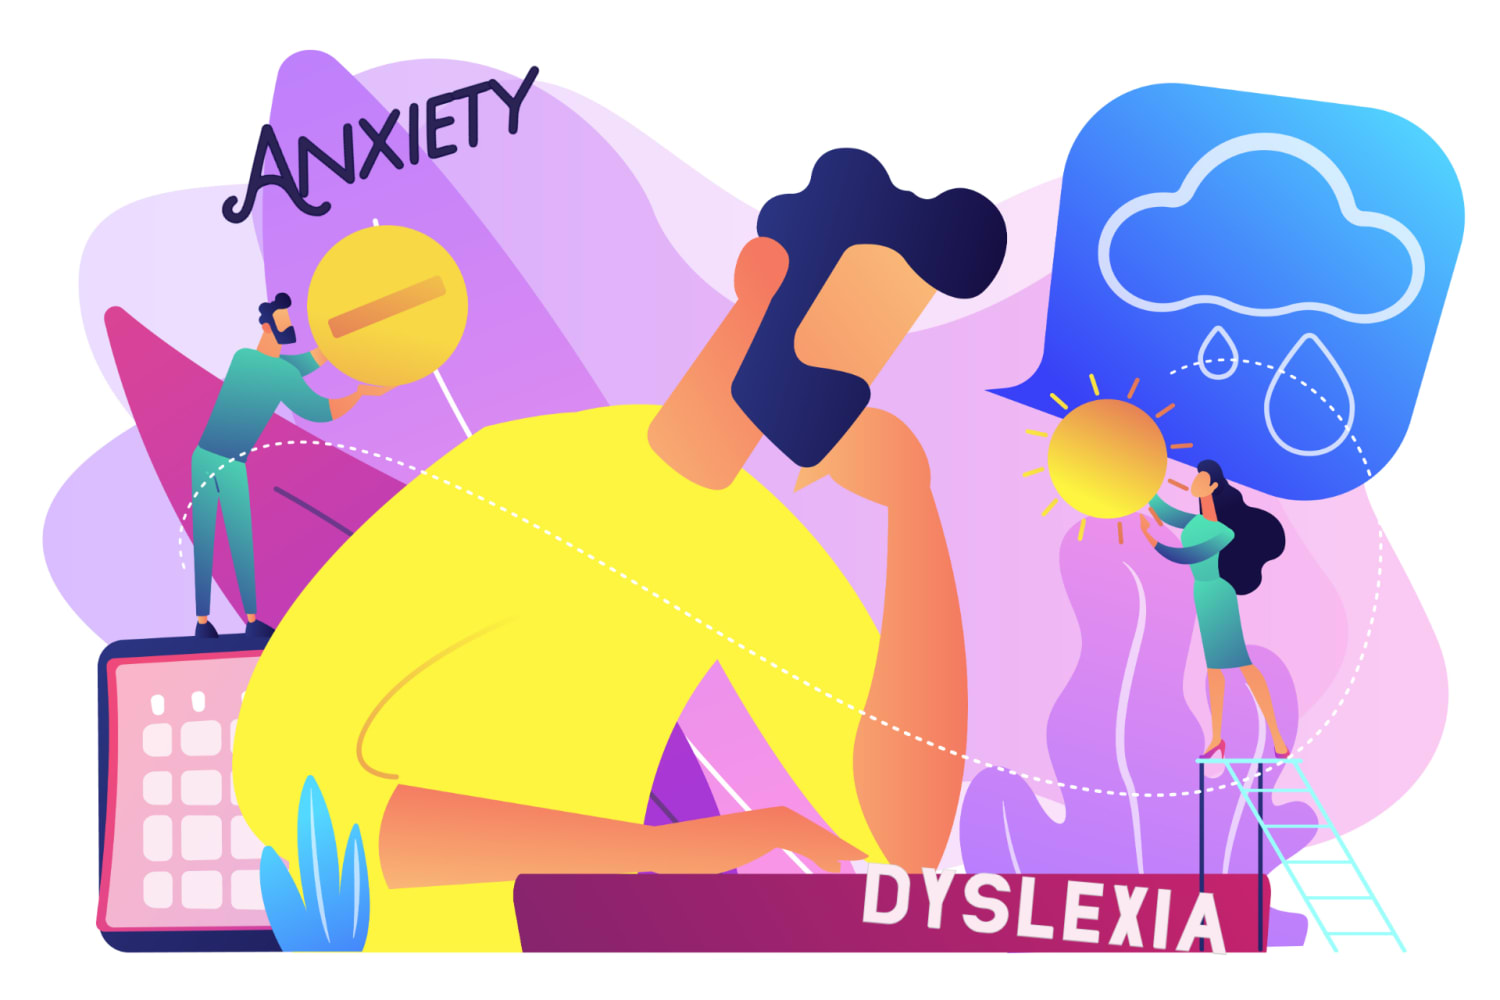 Quick Charts Visualize Design For Users With Anxiety, Dyslexia, Low Vision, More